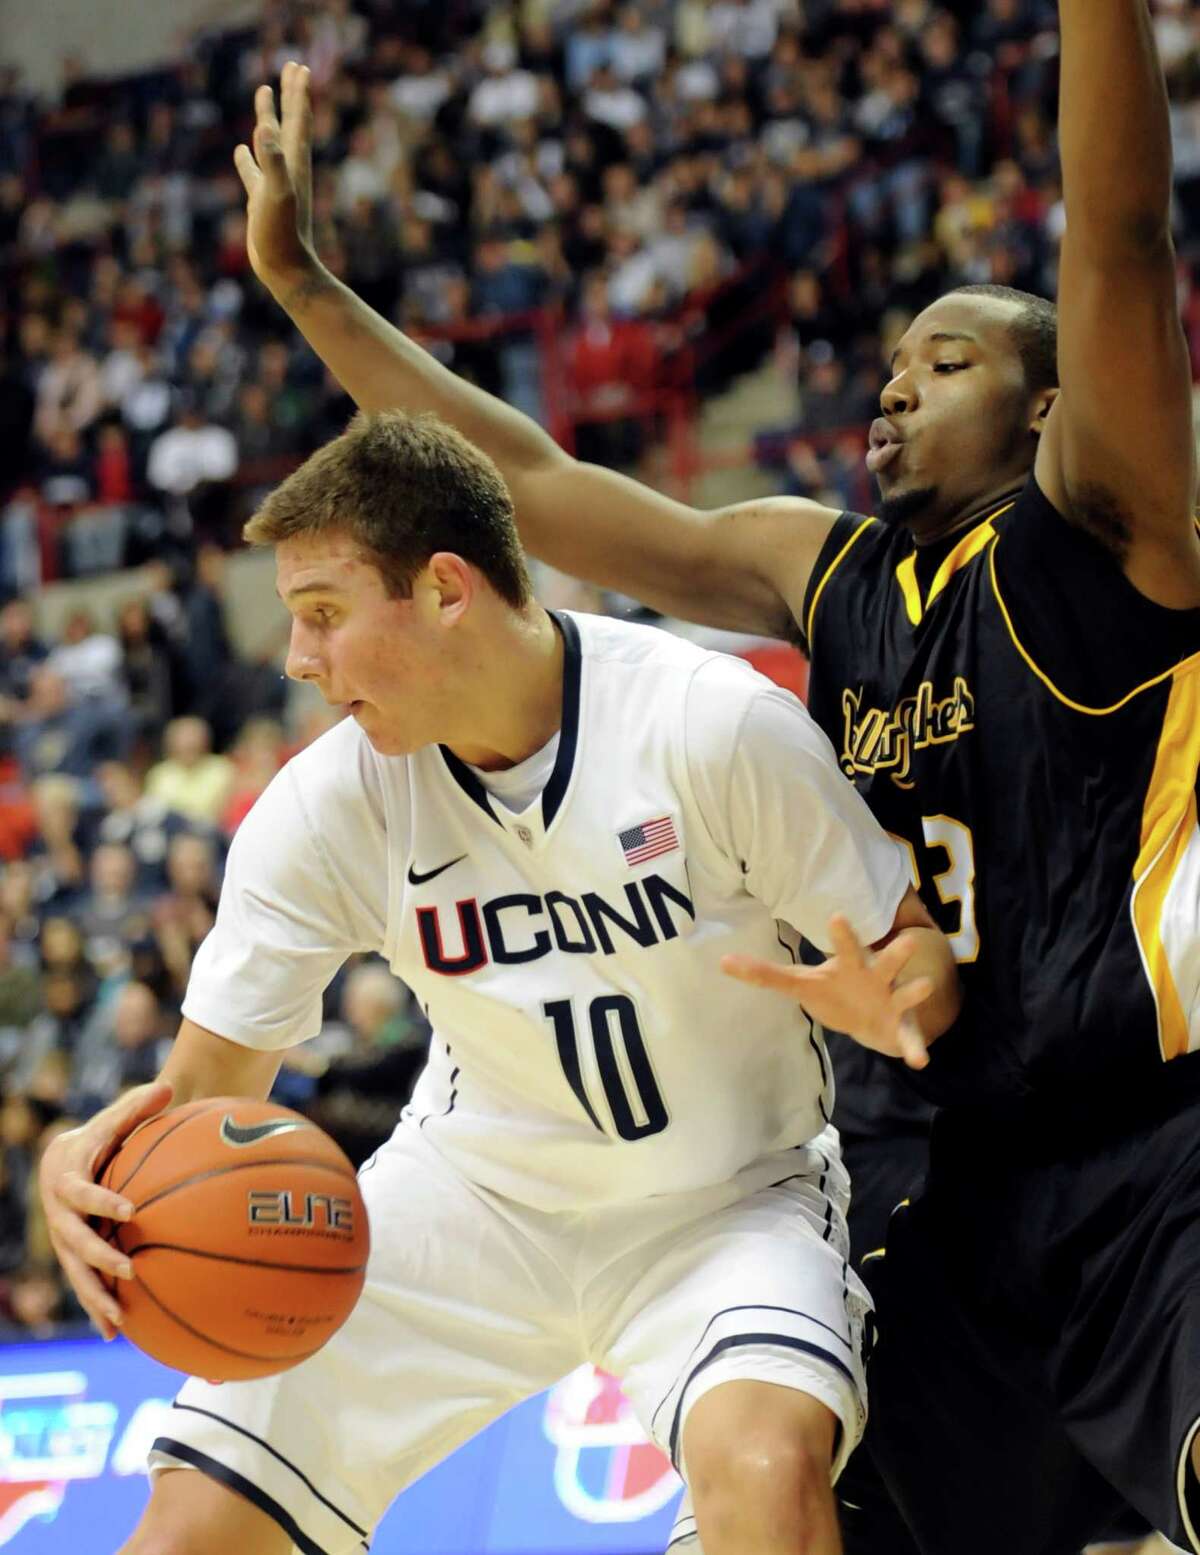 Connecticut's Tyler Olander, left, is defended by American International's Braxton Gardner in the first half of an NCAA college exhibition basketball game Wednesday, Nov. 2, 2011, in Storrs, Conn. (AP Photo/Bob Child)